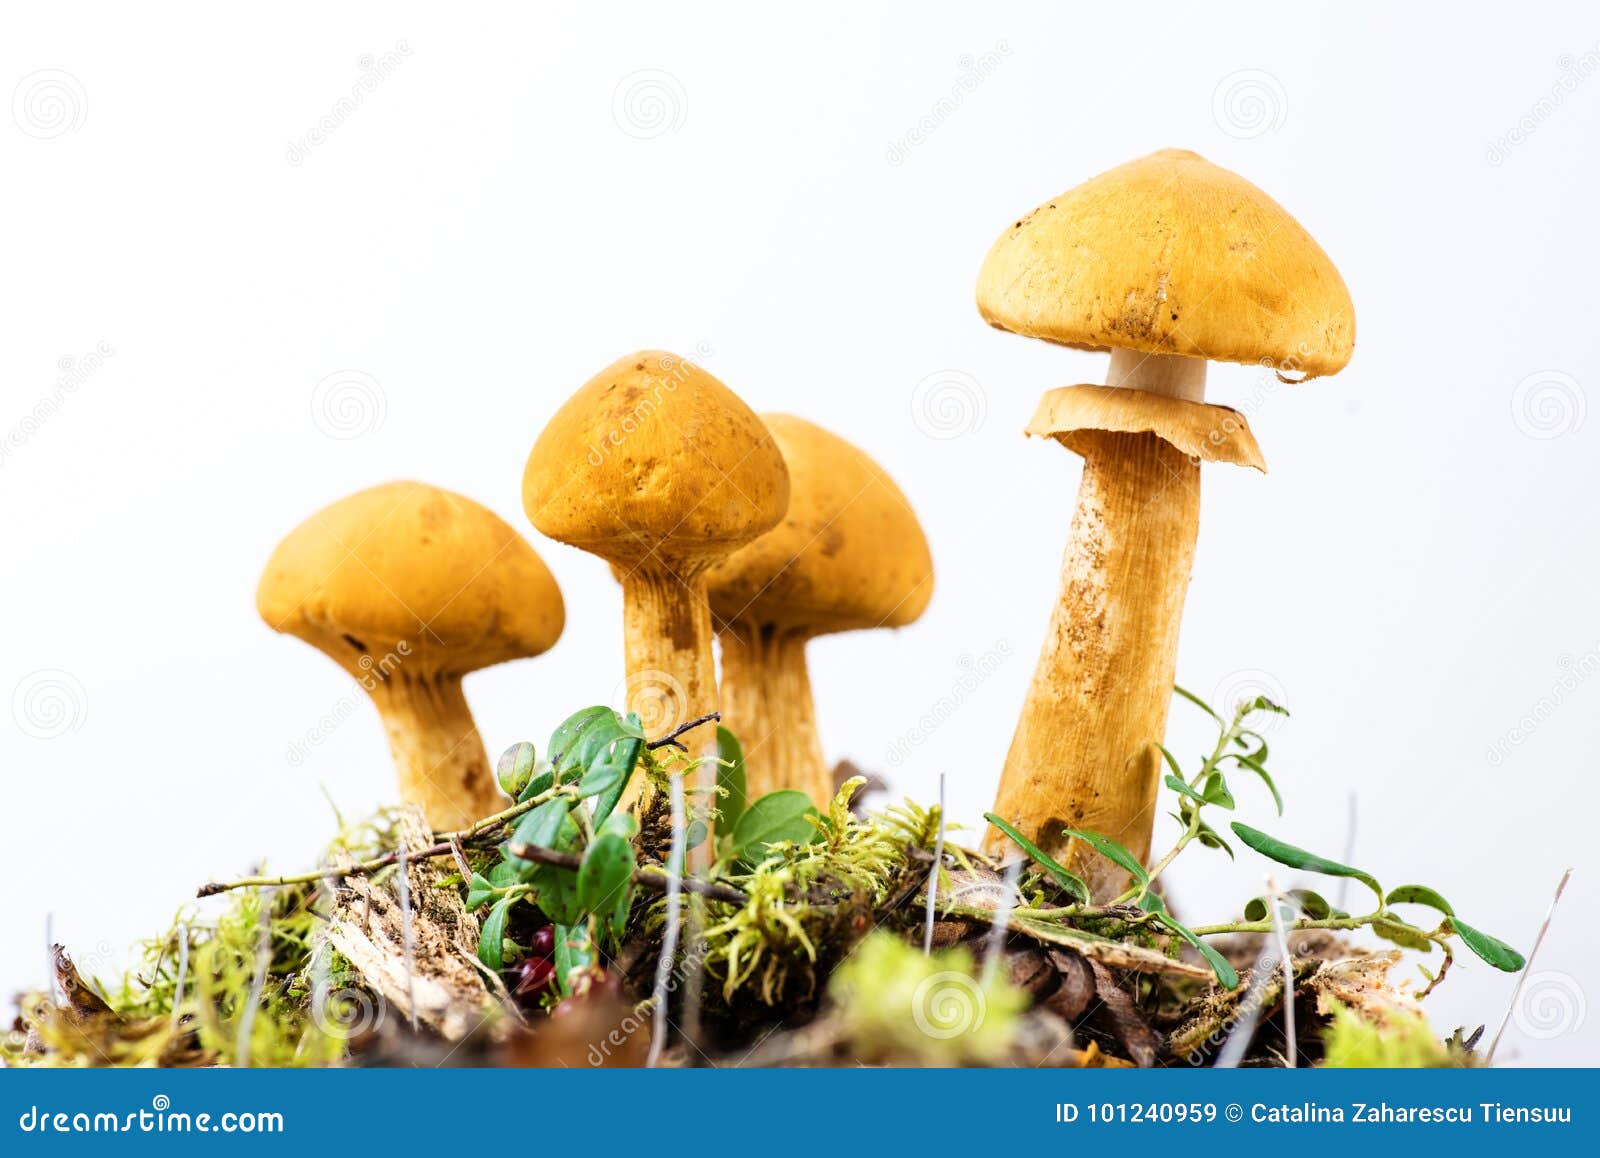 group of young golden bootleg mushrooms